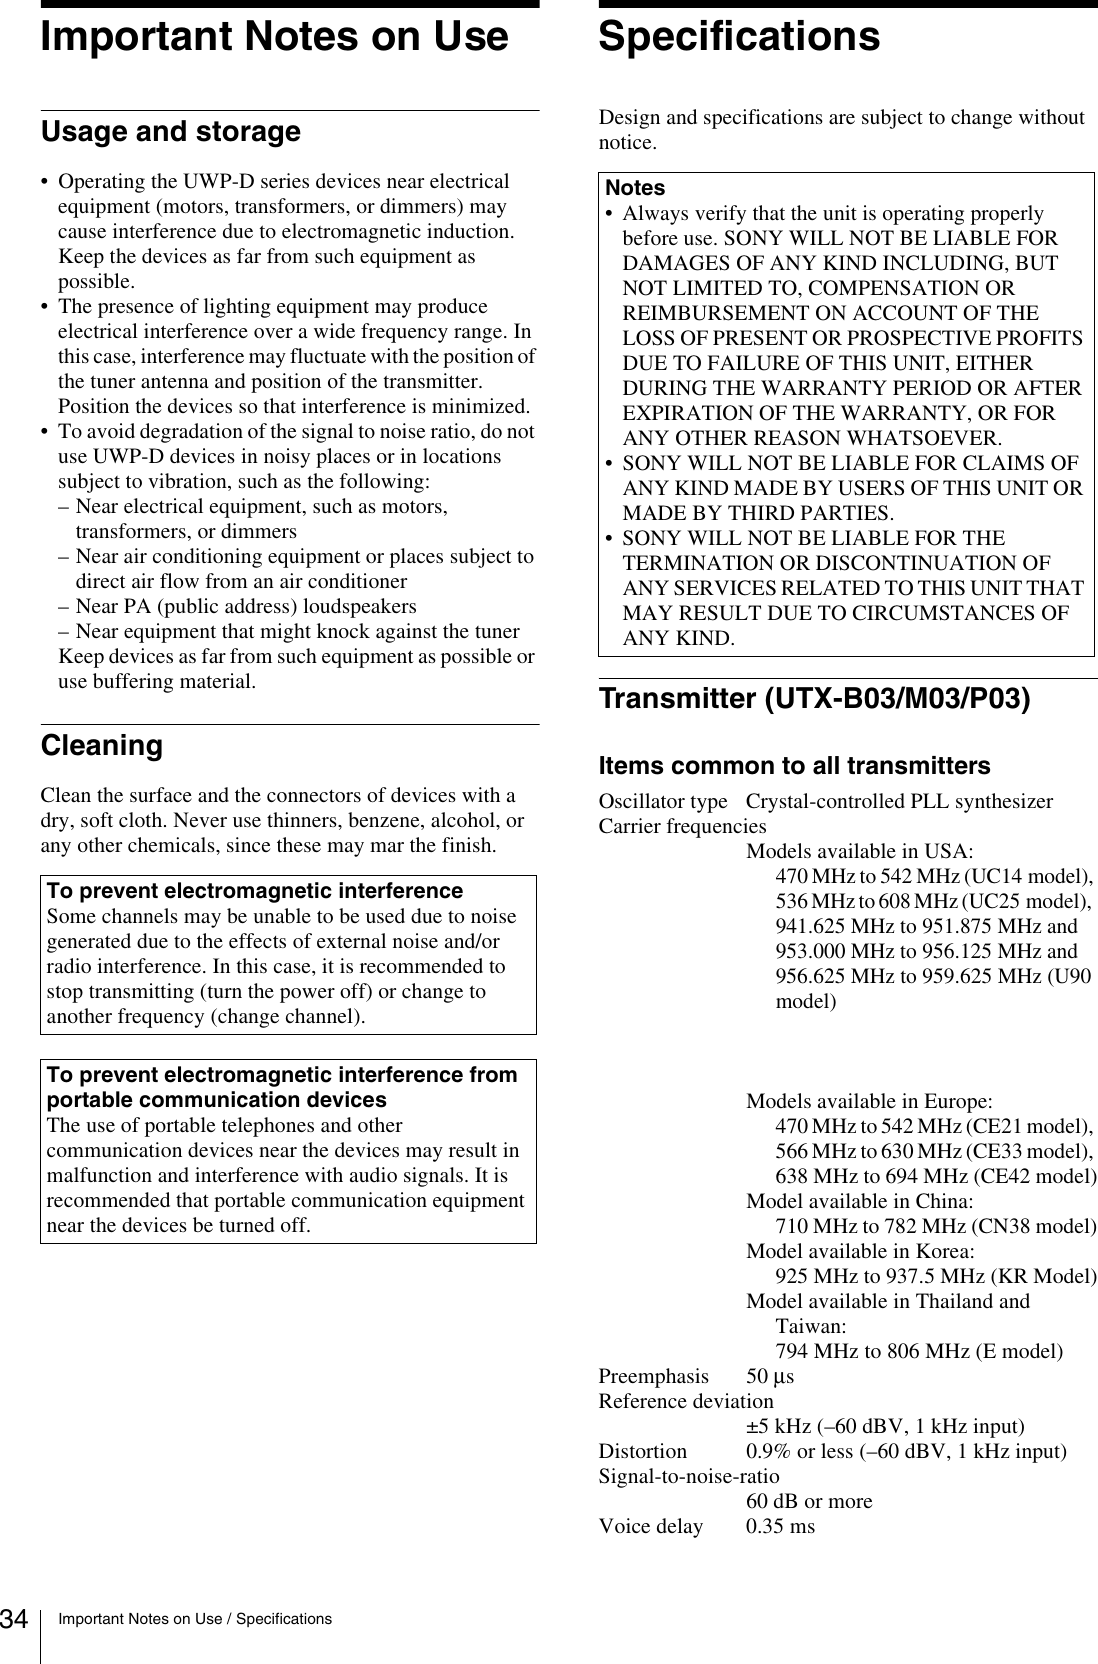 34 Important Notes on Use / SpecificationsImportant Notes on UseUsage and storage• Operating the UWP-D series devices near electricalequipment (motors, transformers, or dimmers) maycause interference due to electromagnetic induction.Keep the devices as far from such equipment aspossible.• The presence of lighting equipment may produceelectrical interference over a wide frequency range. Inthis case, interference may fluctuate with the position of the tuner antenna and position of the transmitter.Position the devices so that interference is minimized.• To avoid degradation of the signal to noise ratio, do notuse UWP-D devices in noisy places or in locationssubject to vibration, such as the following:– Near electrical equipment, such as motors,transformers, or dimmers– Near air conditioning equipment or places subject todirect air flow from an air conditioner– Near PA (public address) loudspeakers– Near equipment that might knock against the tunerKeep devices as far from such equipment as possible oruse buffering material.CleaningClean the surface and the connectors of devices with a dry, soft cloth. Never use thinners, benzene, alcohol, or any other chemicals, since these may mar the finish.SpecificationsDesign and specifications are subject to change without notice.Transmitter (UTX-B03/M03/P03)Items common to all transmittersOscillator type Crystal-controlled PLL synthesizerCarrier frequenciesModels available in USA:470 MHz to 542 MHz (UC14 model), 536 MHz to 608 MHz (UC25 model),    941.625 MHz to 951.875 MHz and 953.000 MHz to 956.125 MHz and 956.625 MHz to 959.625 MHz (U90 model)Models available in Europe:470 MHz to 542 MHz (CE21 model), 566 MHz to 630 MHz (CE33 model), 638 MHz to 694 MHz (CE42 model)Model available in China:710 MHz to 782 MHz (CN38 model)Model available in Korea:925 MHz to 937.5 MHz (KR Model)Model available in Thailand and Taiwan:794 MHz to 806 MHz (E model)Preemphasis 50 μs Reference deviation±5 kHz (–60 dBV, 1 kHz input)Distortion 0.9% or less (–60 dBV, 1 kHz input)Signal-to-noise-ratio60 dB or moreVoice delay 0.35 msTo prevent electromagnetic interferenceSome channels may be unable to be used due to noise generated due to the effects of external noise and/or radio interference. In this case, it is recommended to stop transmitting (turn the power off) or change to another frequency (change channel).To prevent electromagnetic interference from portable communication devicesThe use of portable telephones and other communication devices near the devices may result in malfunction and interference with audio signals. It is recommended that portable communication equipment near the devices be turned off.Notes• Always verify that the unit is operating properlybefore use. SONY WILL NOT BE LIABLE FORDAMAGES OF ANY KIND INCLUDING, BUTNOT LIMITED TO, COMPENSATION ORREIMBURSEMENT ON ACCOUNT OF THELOSS OF PRESENT OR PROSPECTIVE PROFITSDUE TO FAILURE OF THIS UNIT, EITHERDURING THE WARRANTY PERIOD OR AFTEREXPIRATION OF THE WARRANTY, OR FORANY OTHER REASON WHATSOEVER.• SONY WILL NOT BE LIABLE FOR CLAIMS OFANY KIND MADE BY USERS OF THIS UNIT ORMADE BY THIRD PARTIES.• SONY WILL NOT BE LIABLE FOR THETERMINATION OR DISCONTINUATION OFANY SERVICES RELATED TO THIS UNIT THAT MAY RESULT DUE TO CIRCUMSTANCES OFANY KIND.